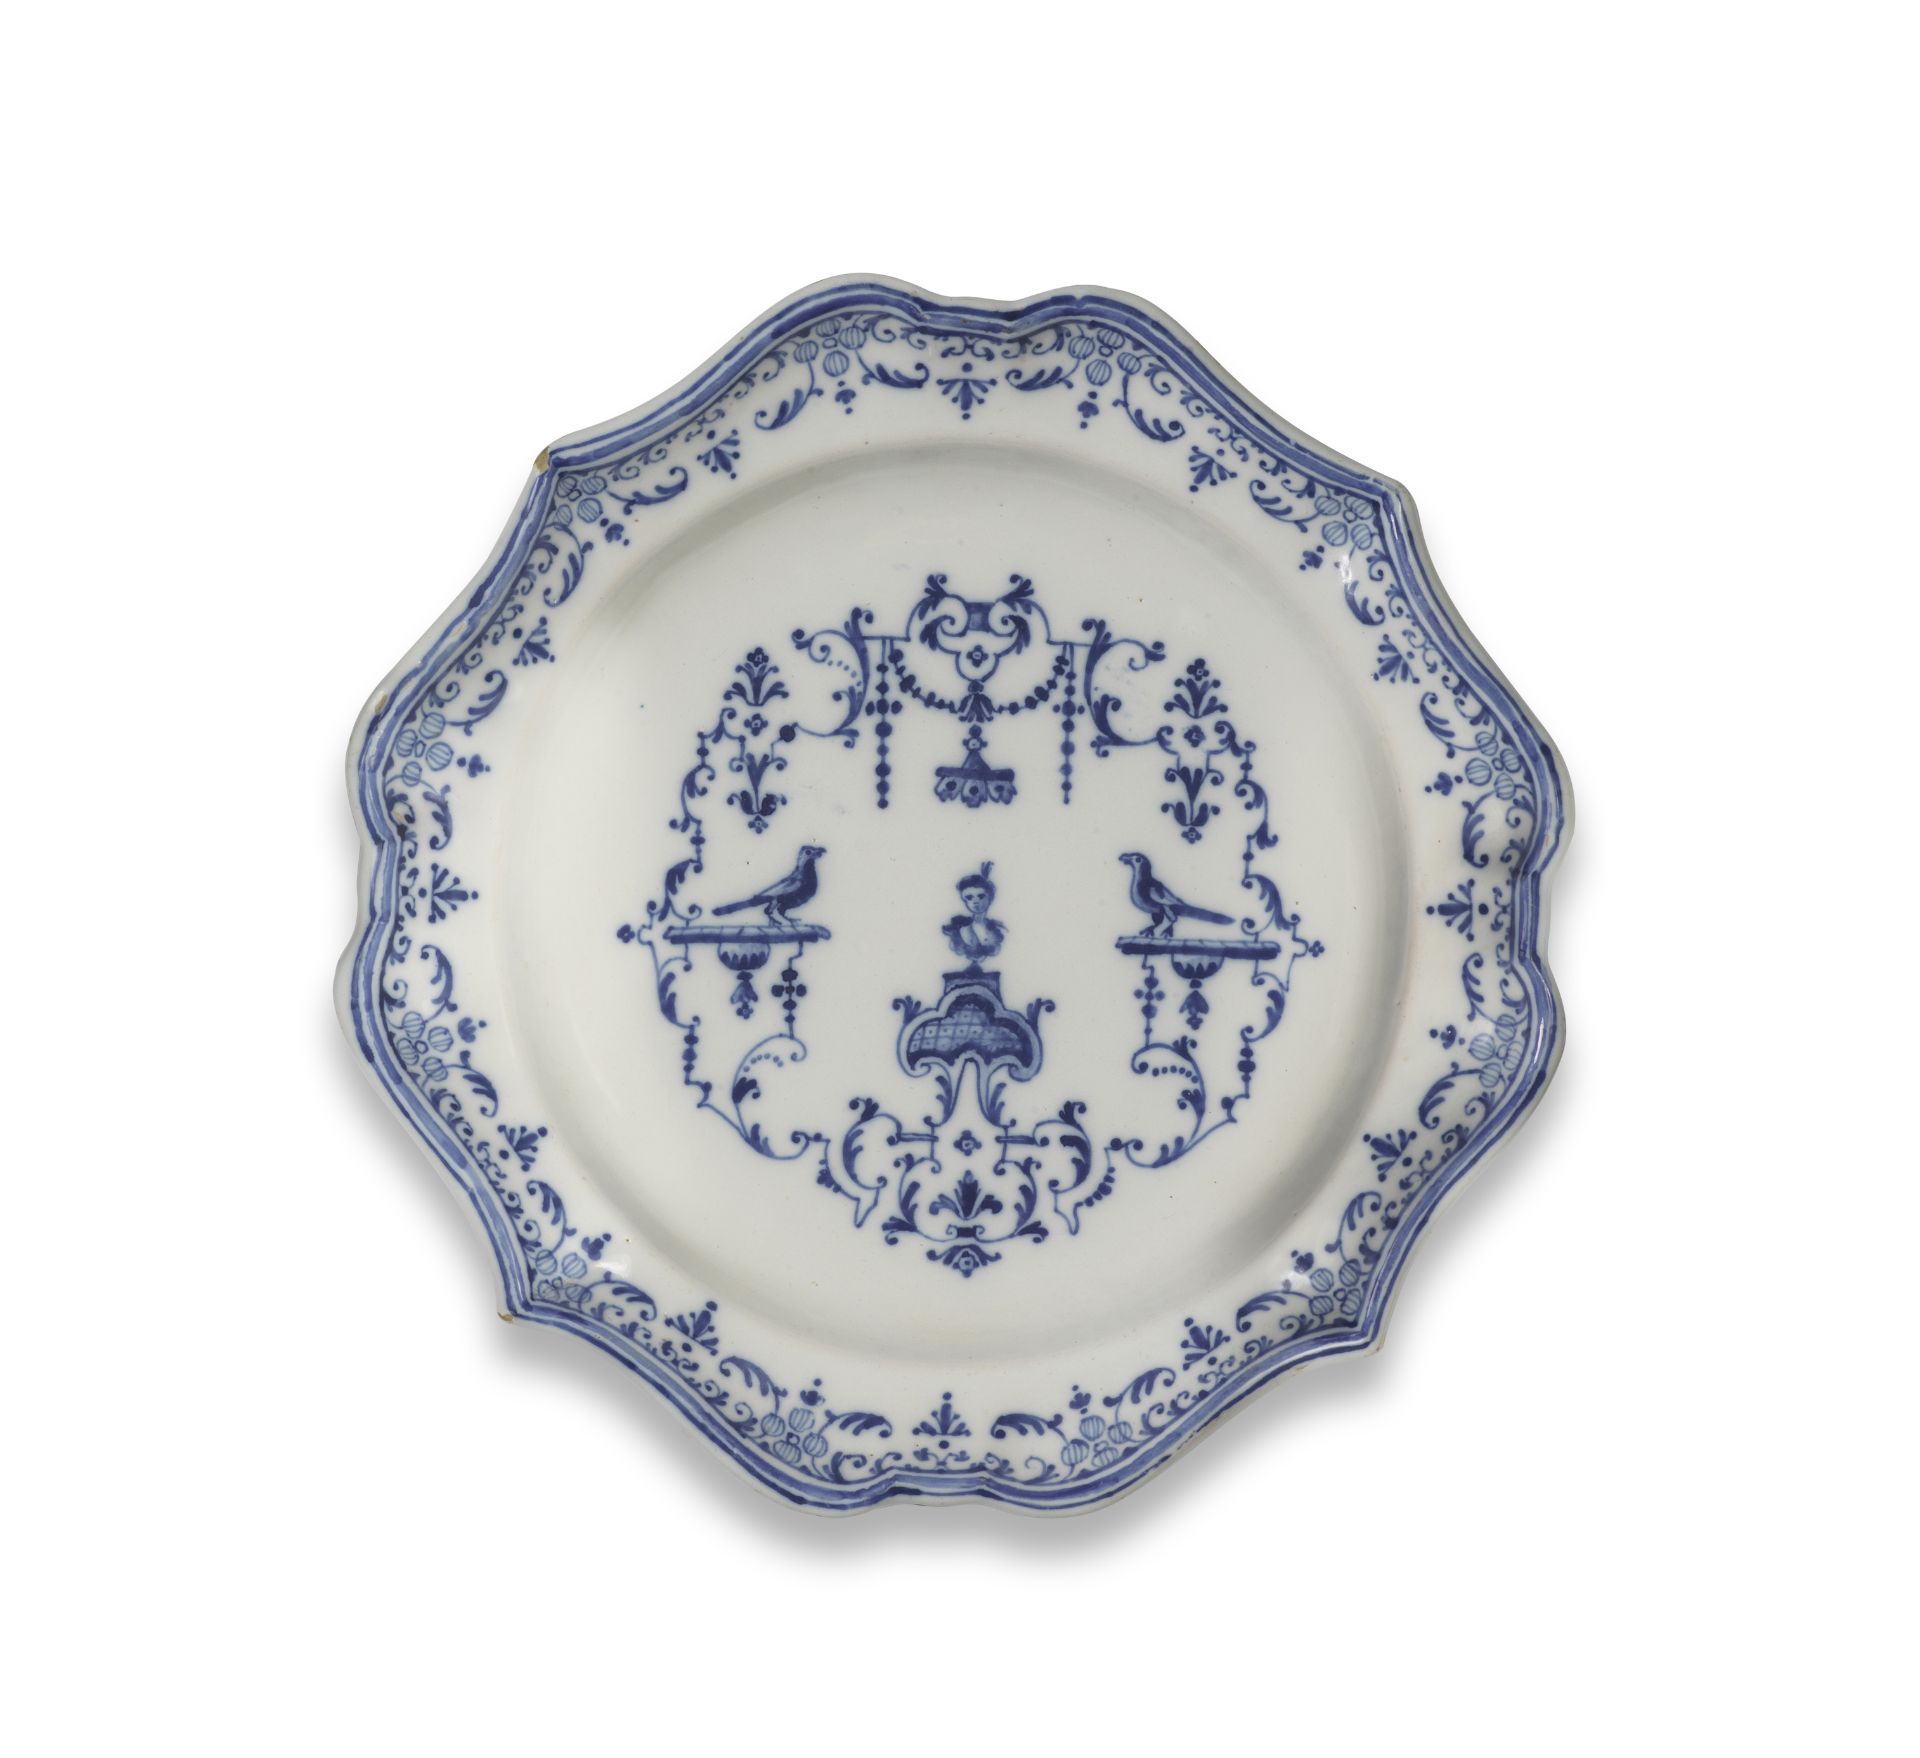 A Moustiers, Clerissy factory, faience dish, circa 1720-30